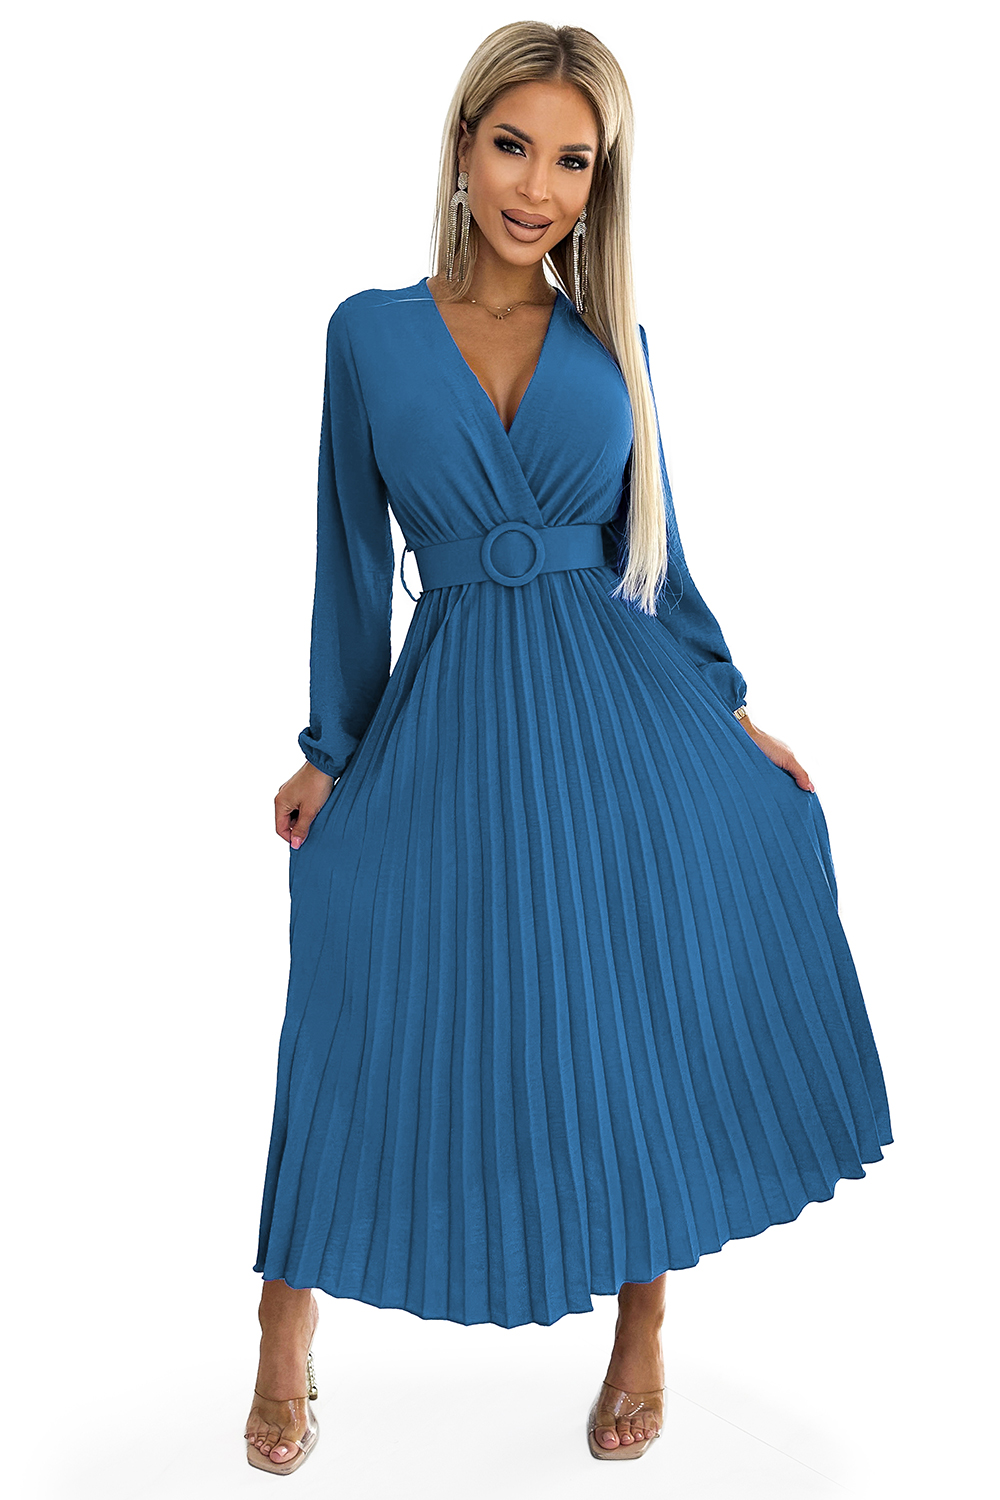 Pleated Midi Dress With A Neckline, Long Sleeves And A Wide Numoco Belt